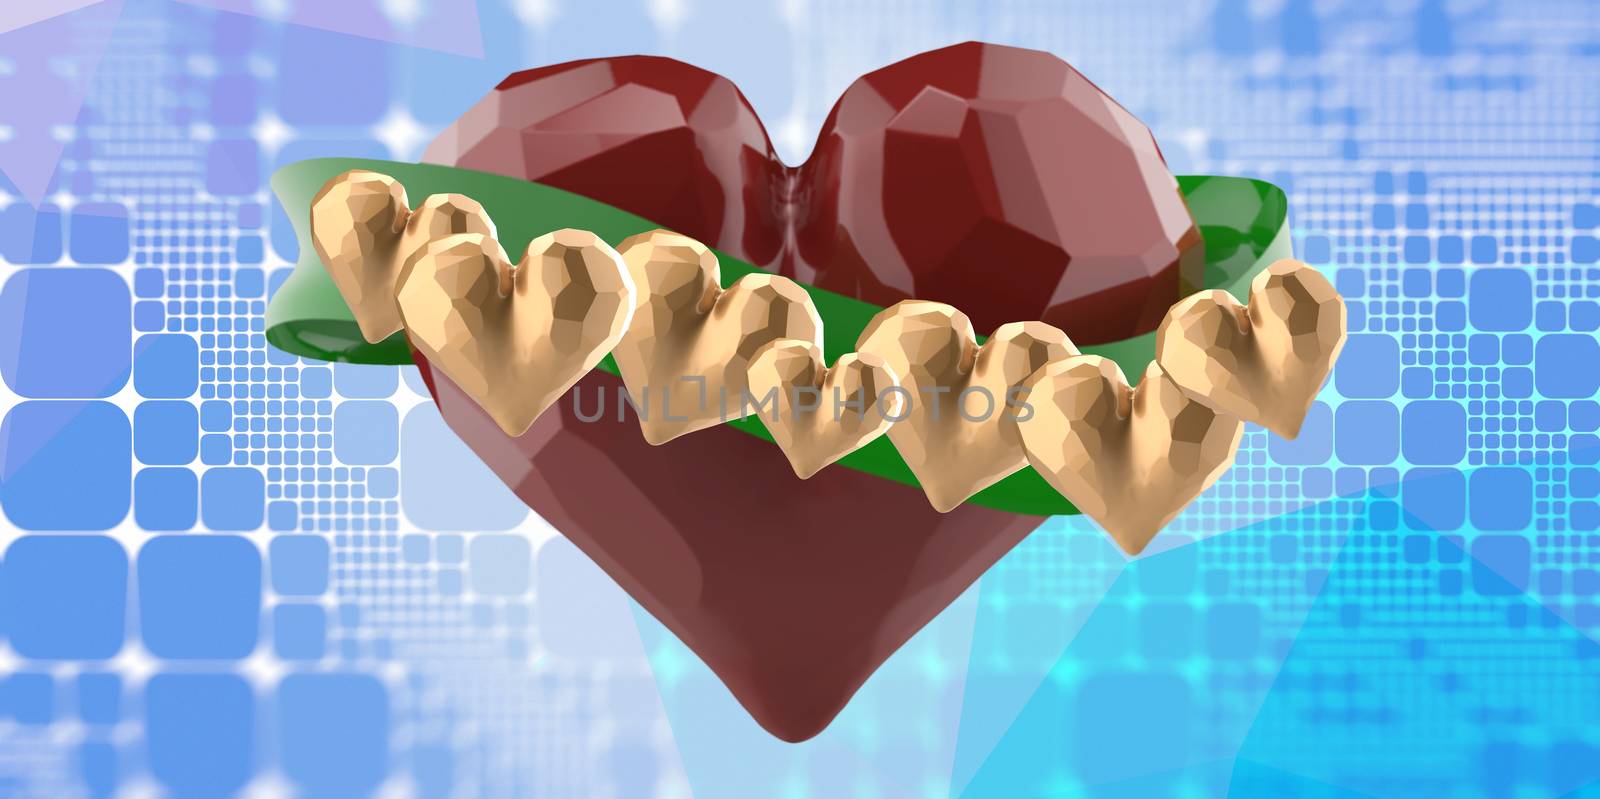 Happy Valentine day Flying red chopped heart with green ribbon and gold hearts. On blue abstract square polygonal background. 3d illustration by skrotov